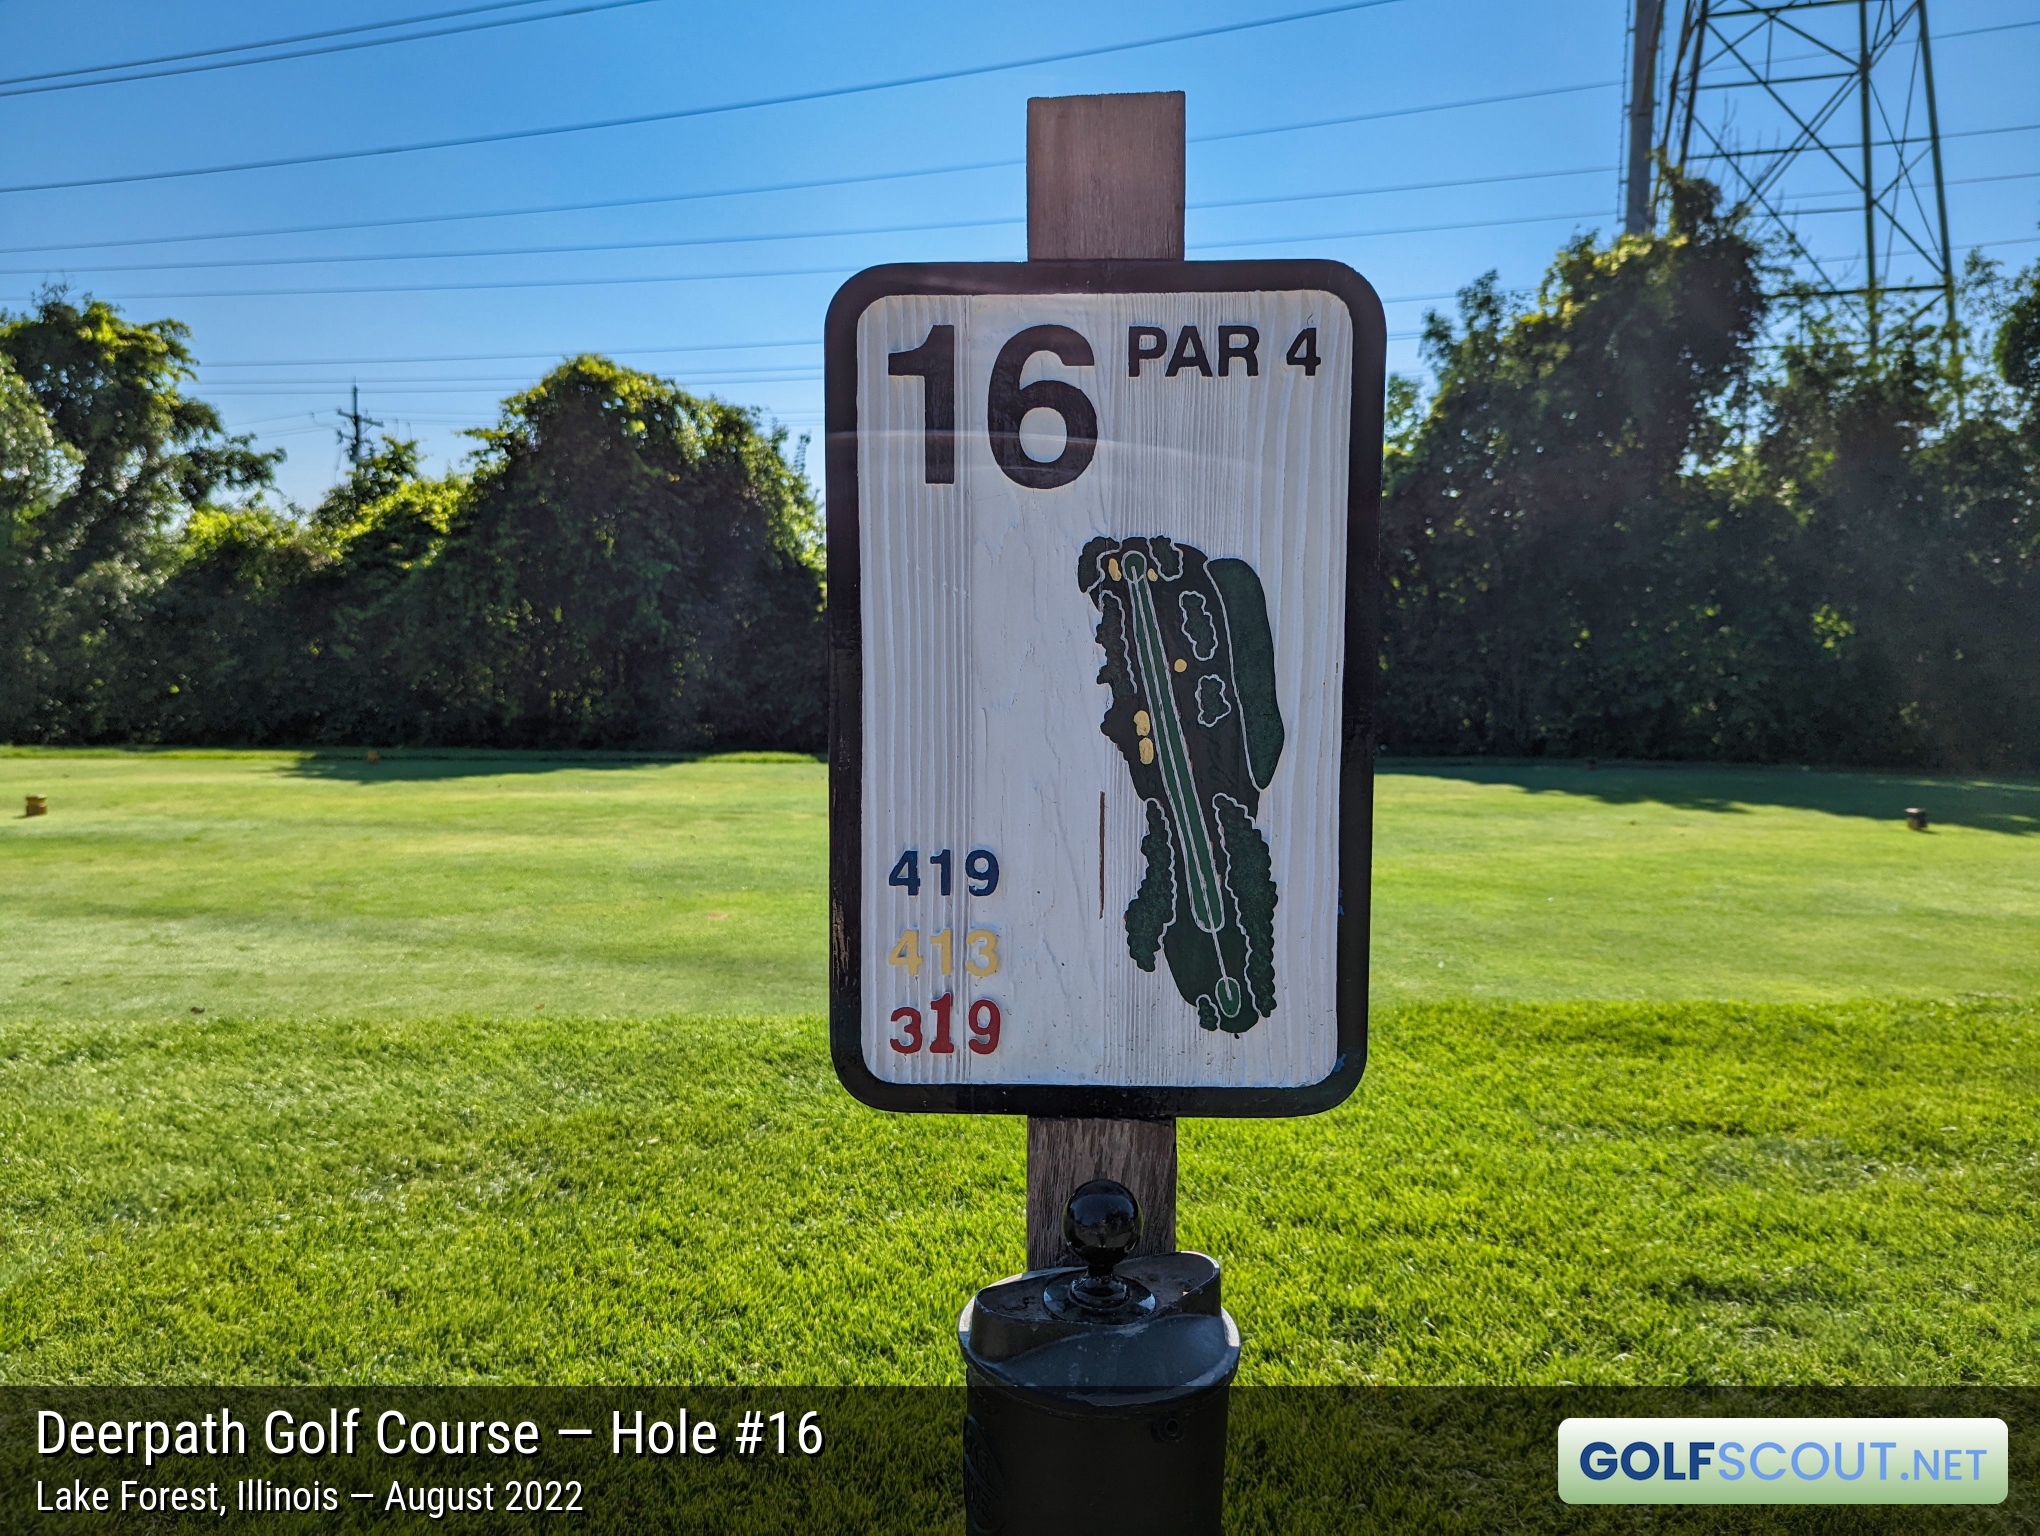 Photo of hole #16 at Deerpath Golf Course in Lake Forest, Illinois. 